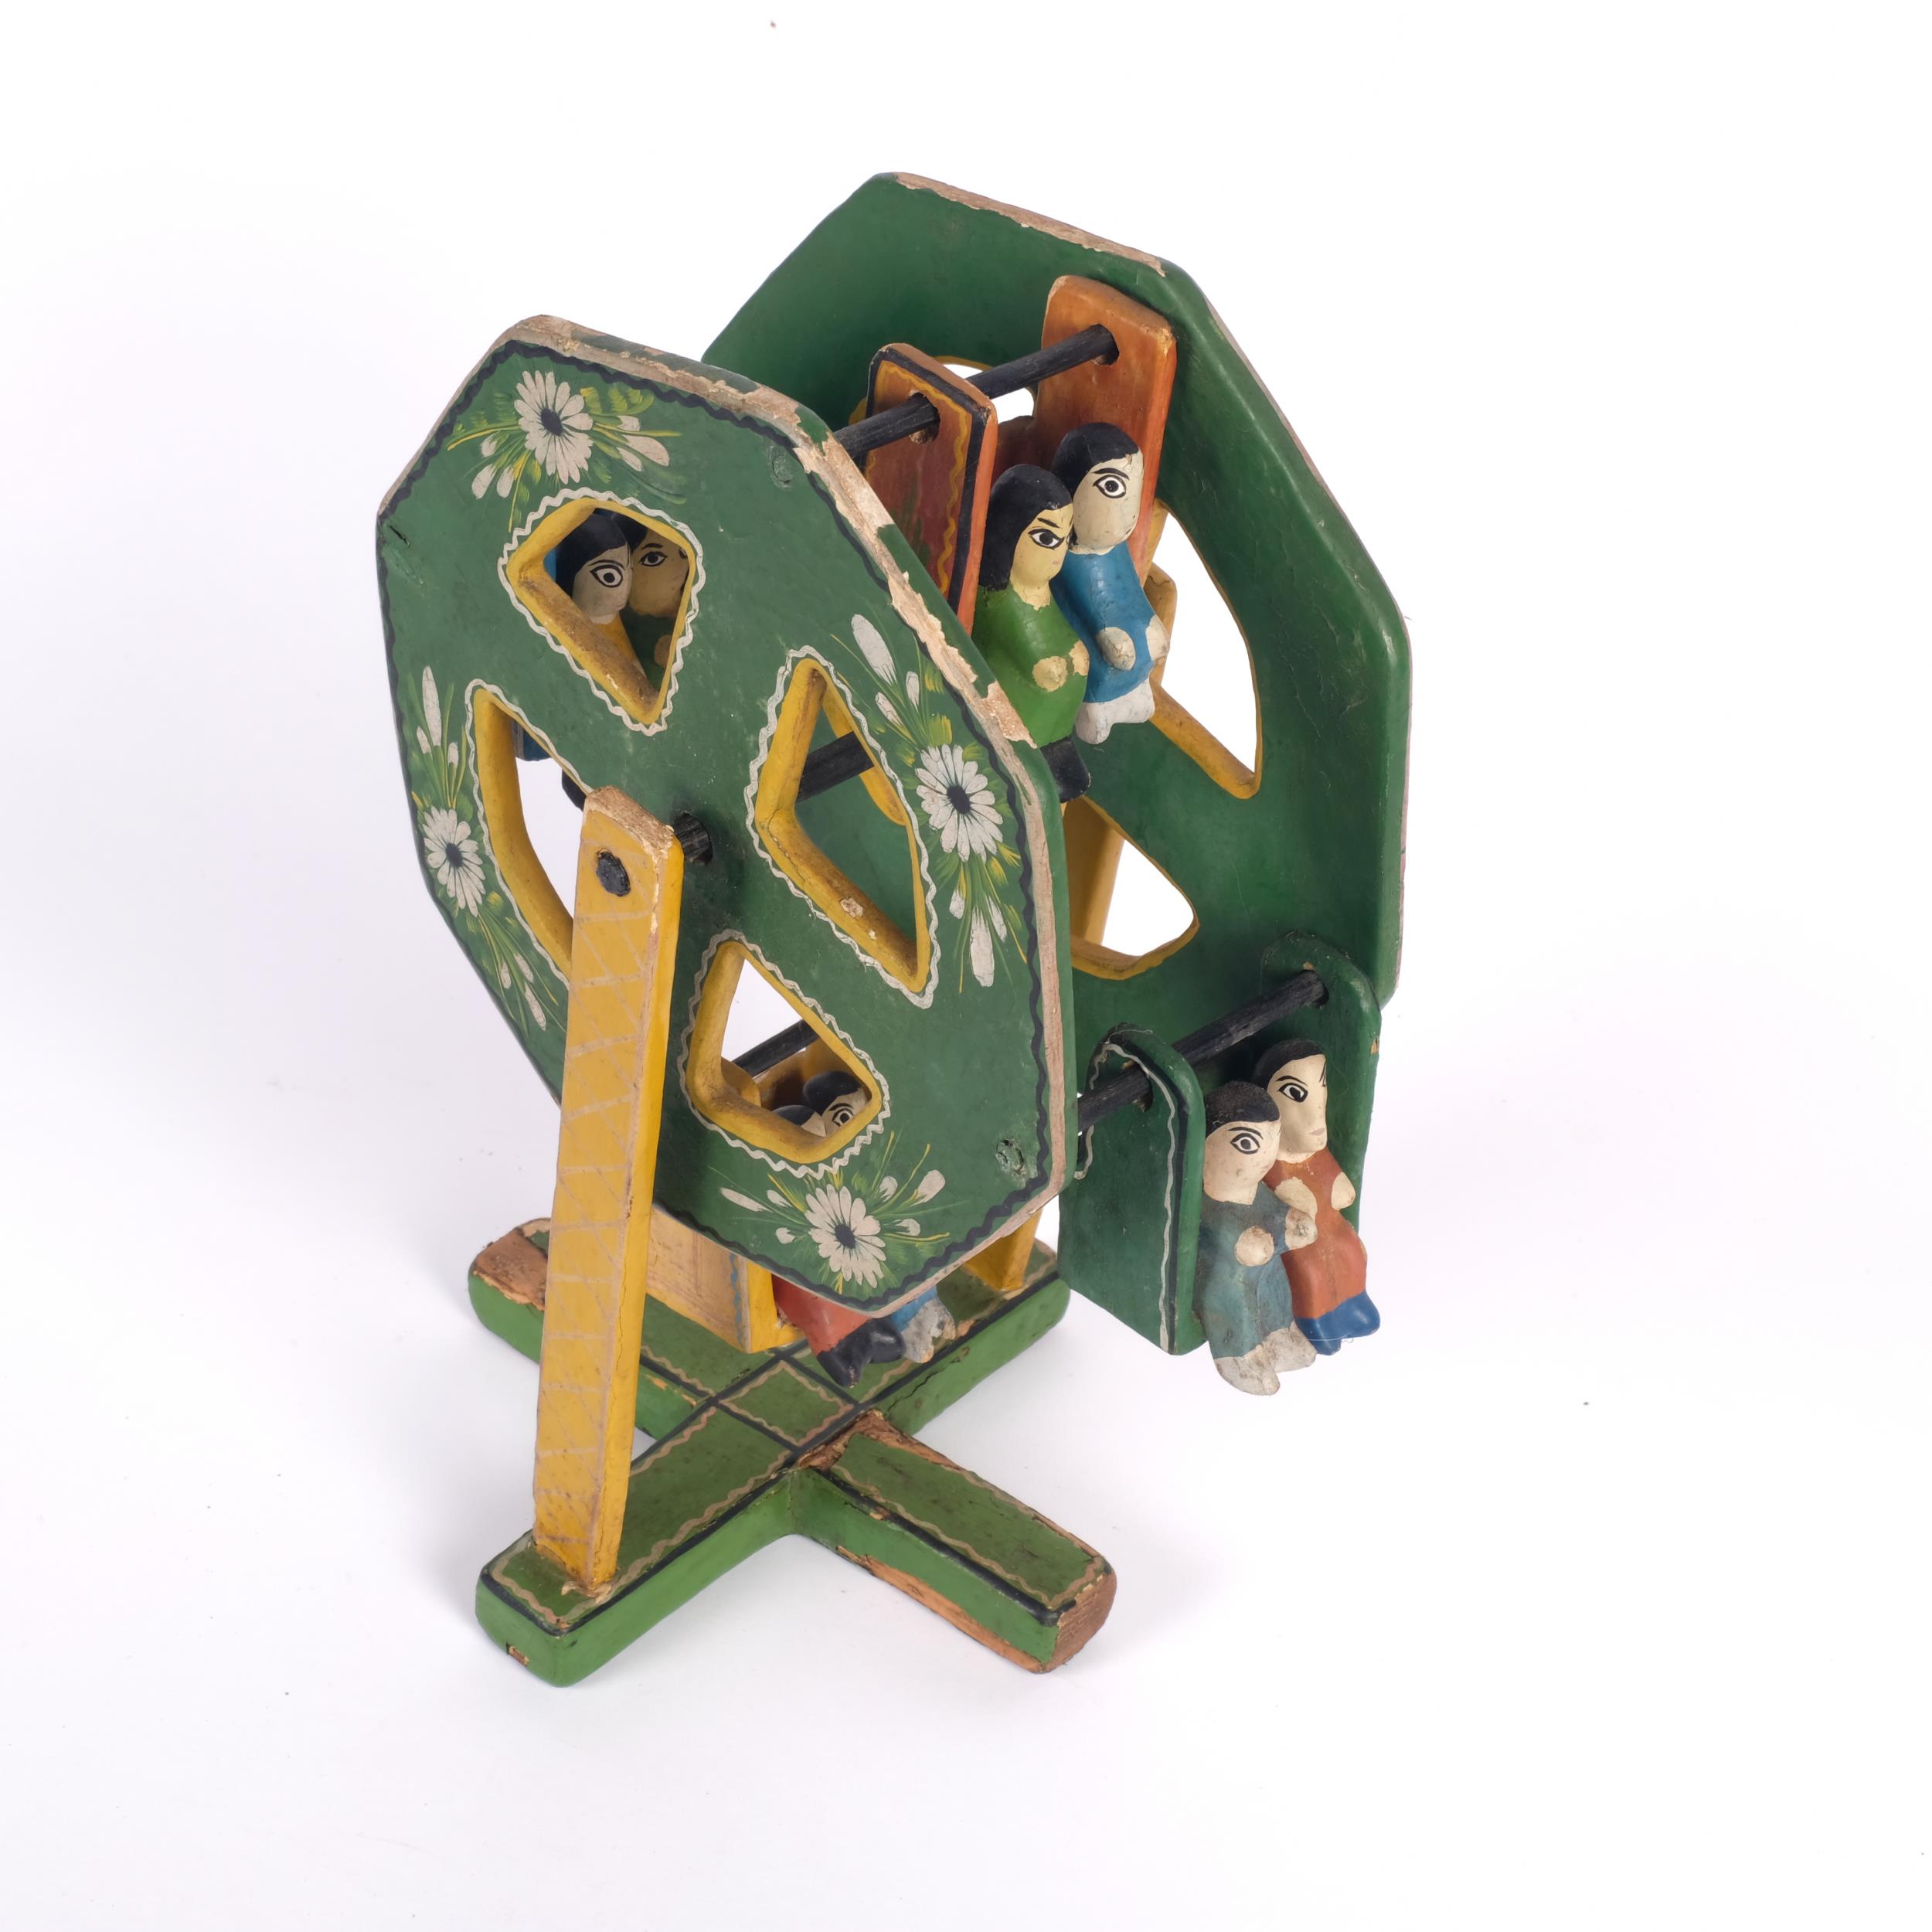 An unusual Mexican Folk Art painted ferris wheel, complete with 4 swing seats and figures, H31cm - Image 2 of 2